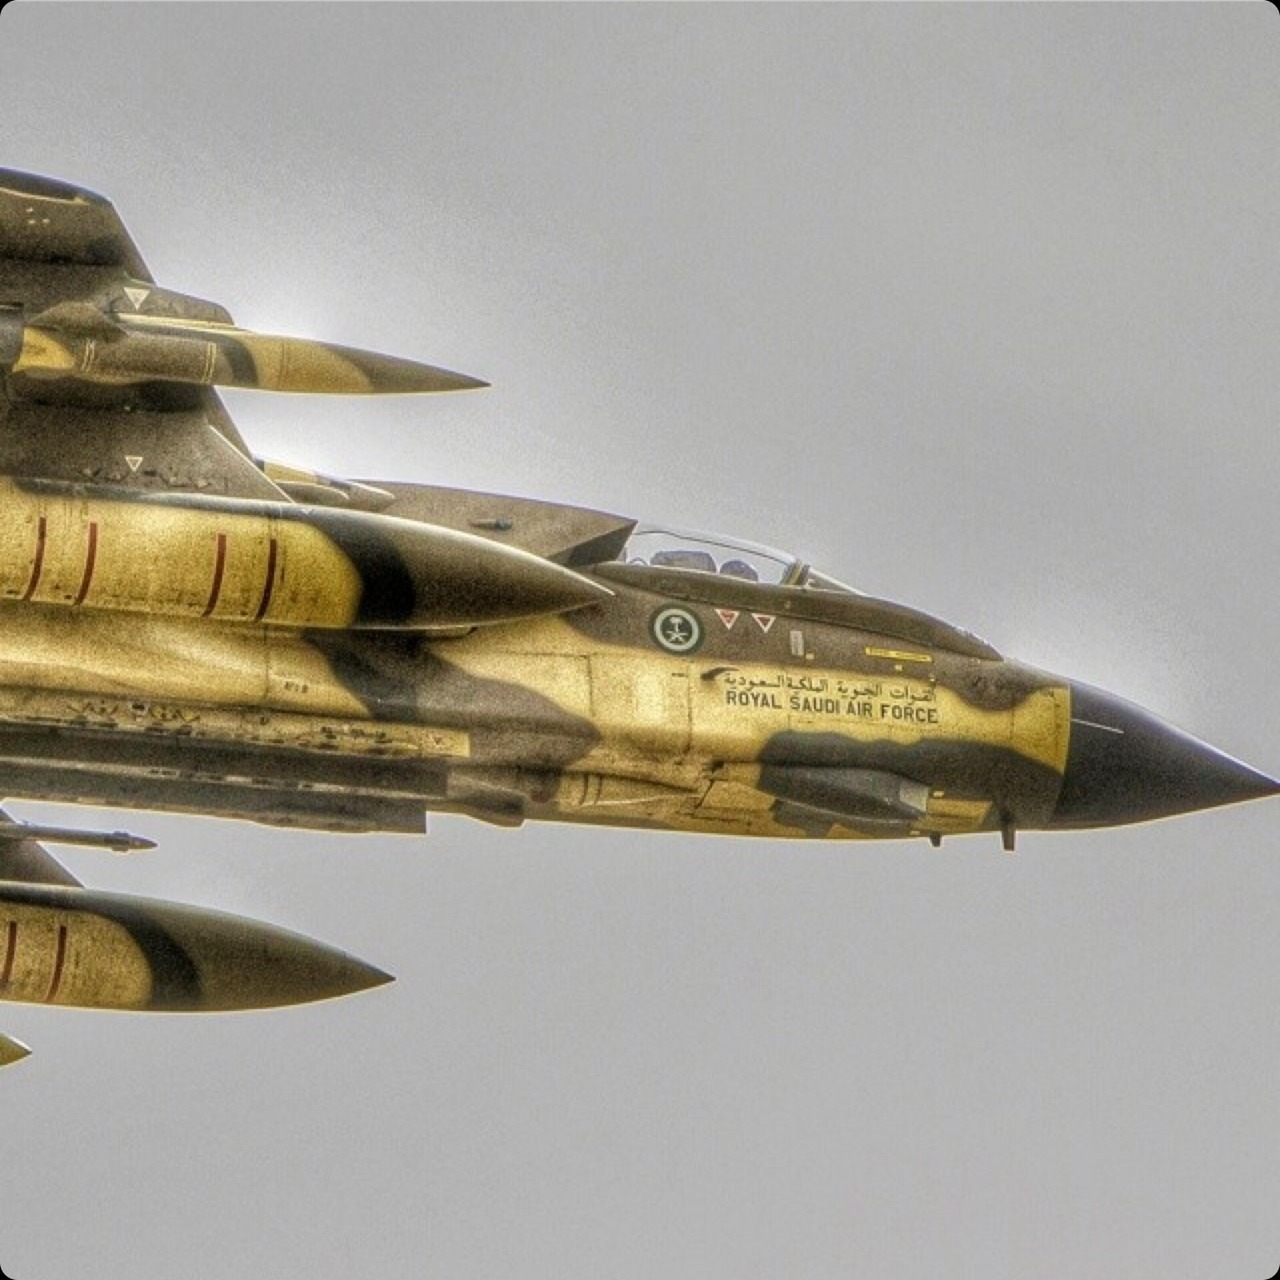 Royal saudi airforce tornado IDS.                   I took this picture of my friend